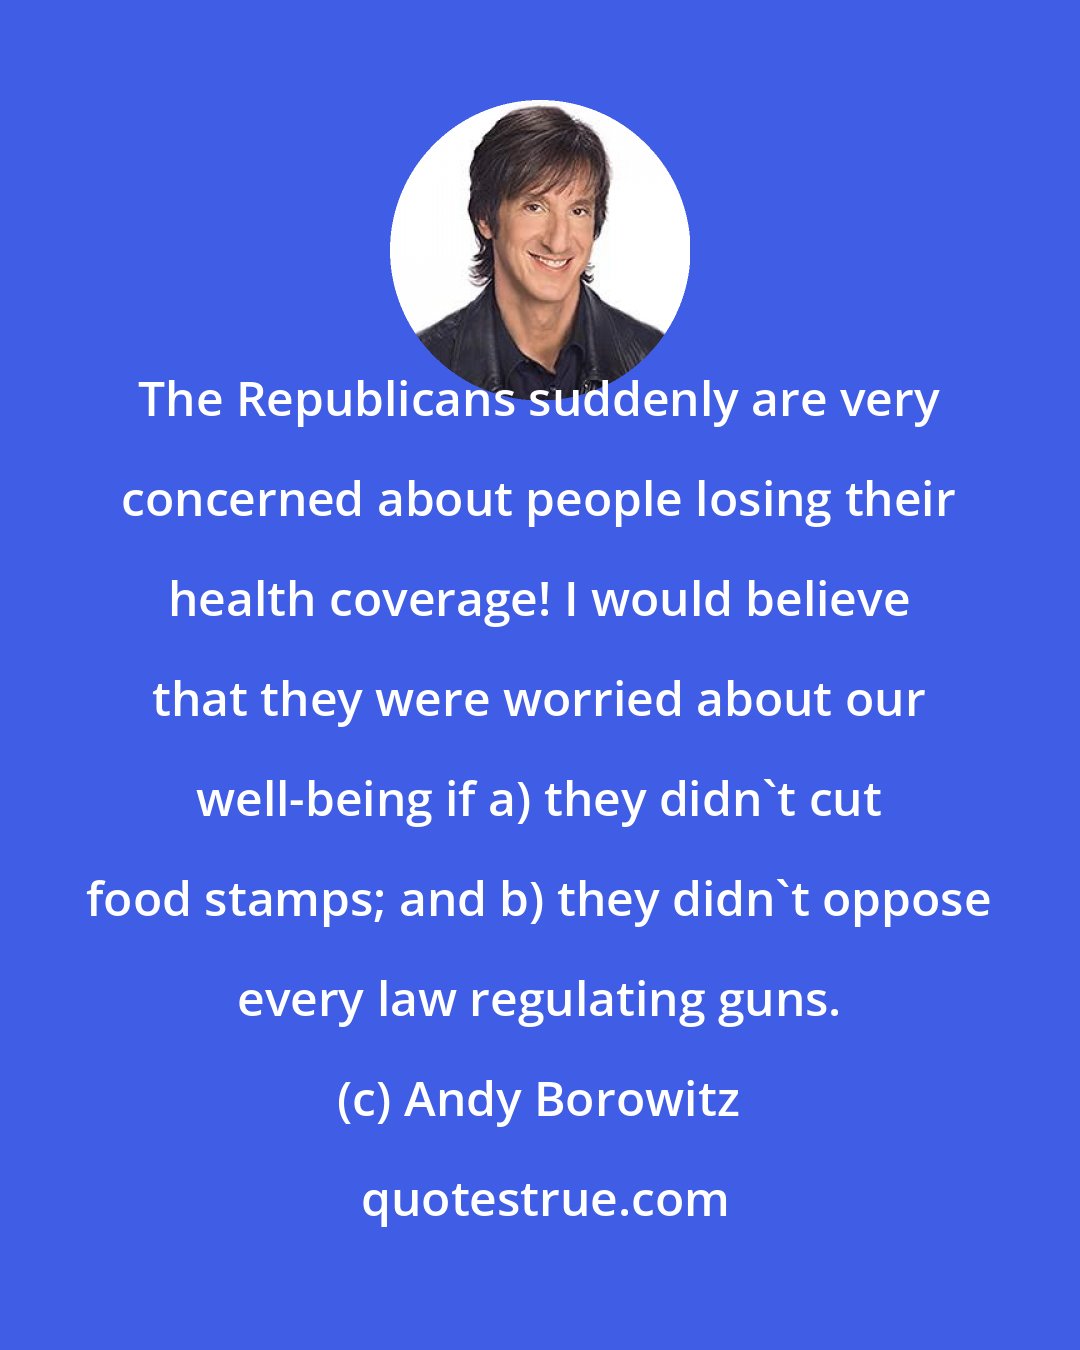 Andy Borowitz: The Republicans suddenly are very concerned about people losing their health coverage! I would believe that they were worried about our well-being if a) they didn't cut food stamps; and b) they didn't oppose every law regulating guns.